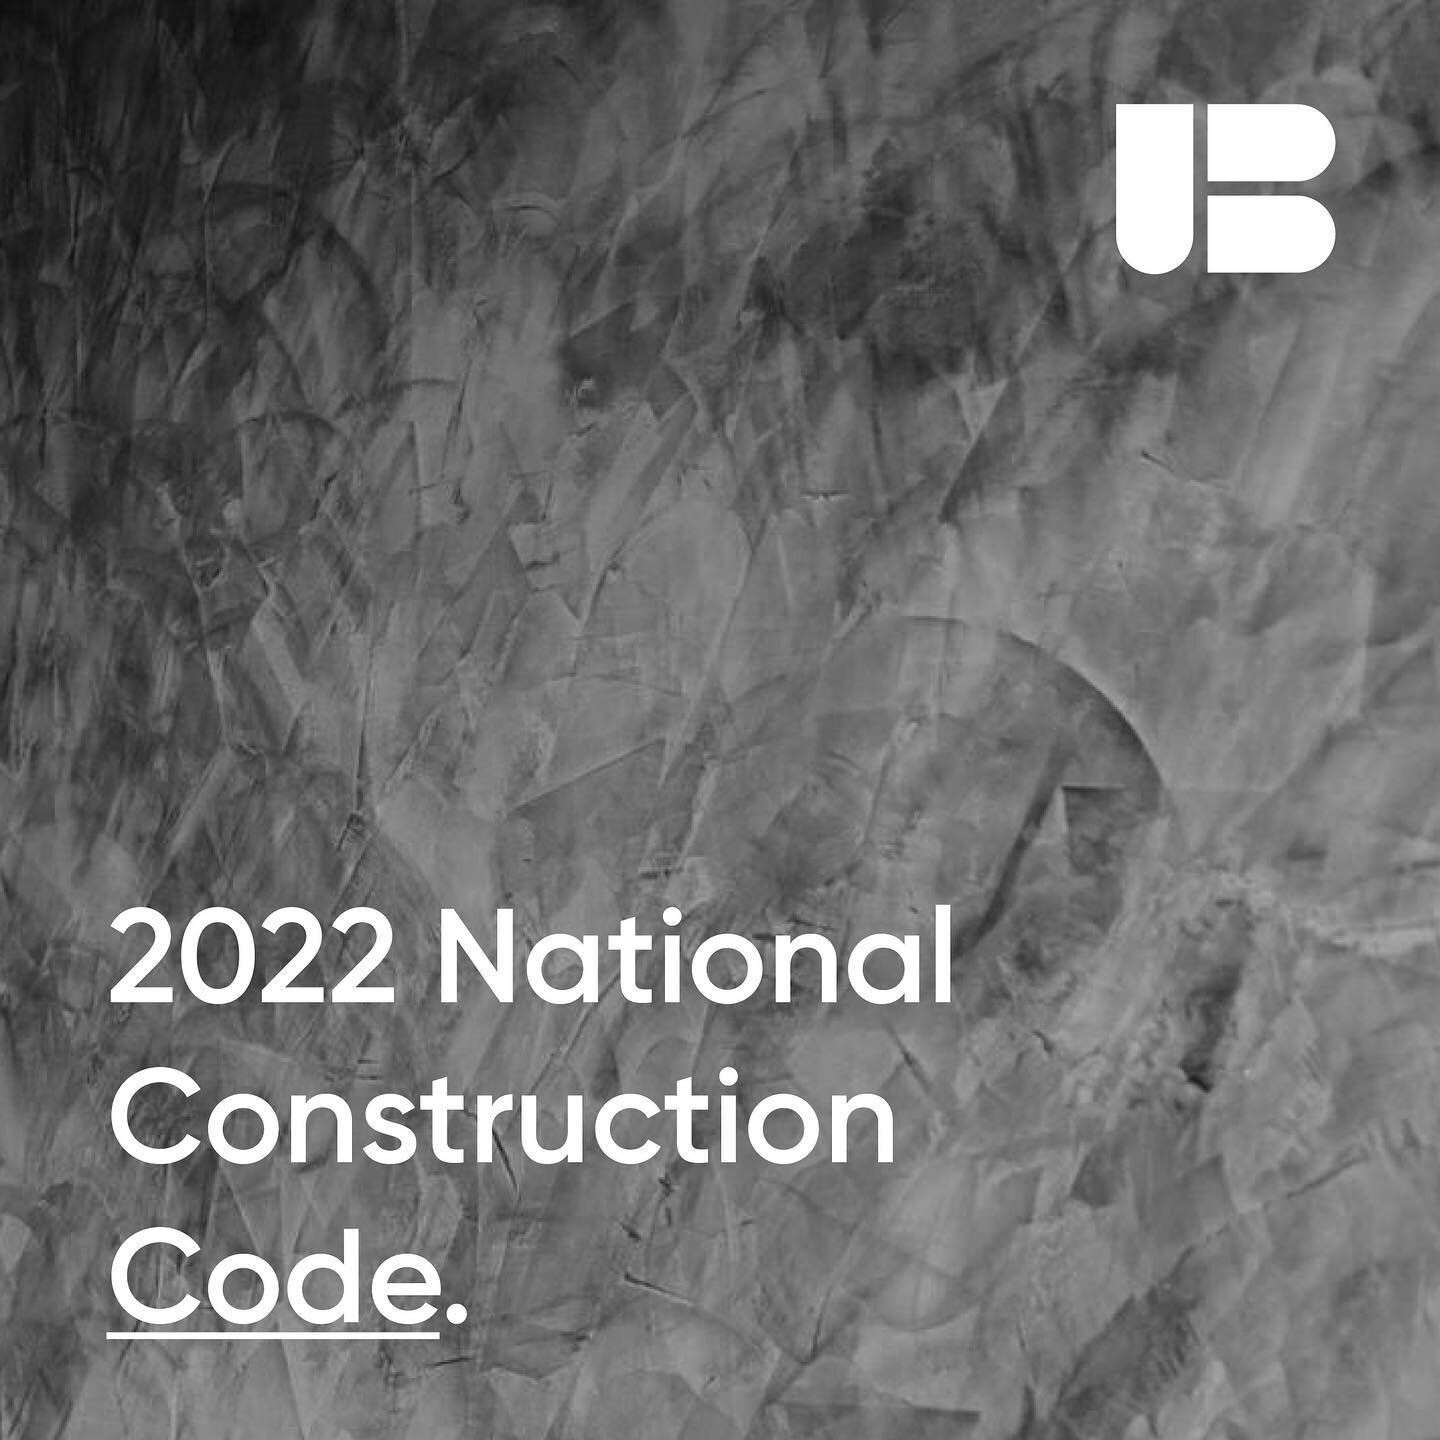 Our team attended the National Construction Code (NCC) 2022 seminars for Volume One and Two, hosted by the Australian Building Codes Board. The seminar was a deep dive into all changes scheduled for the release of the latest National Construction Cod